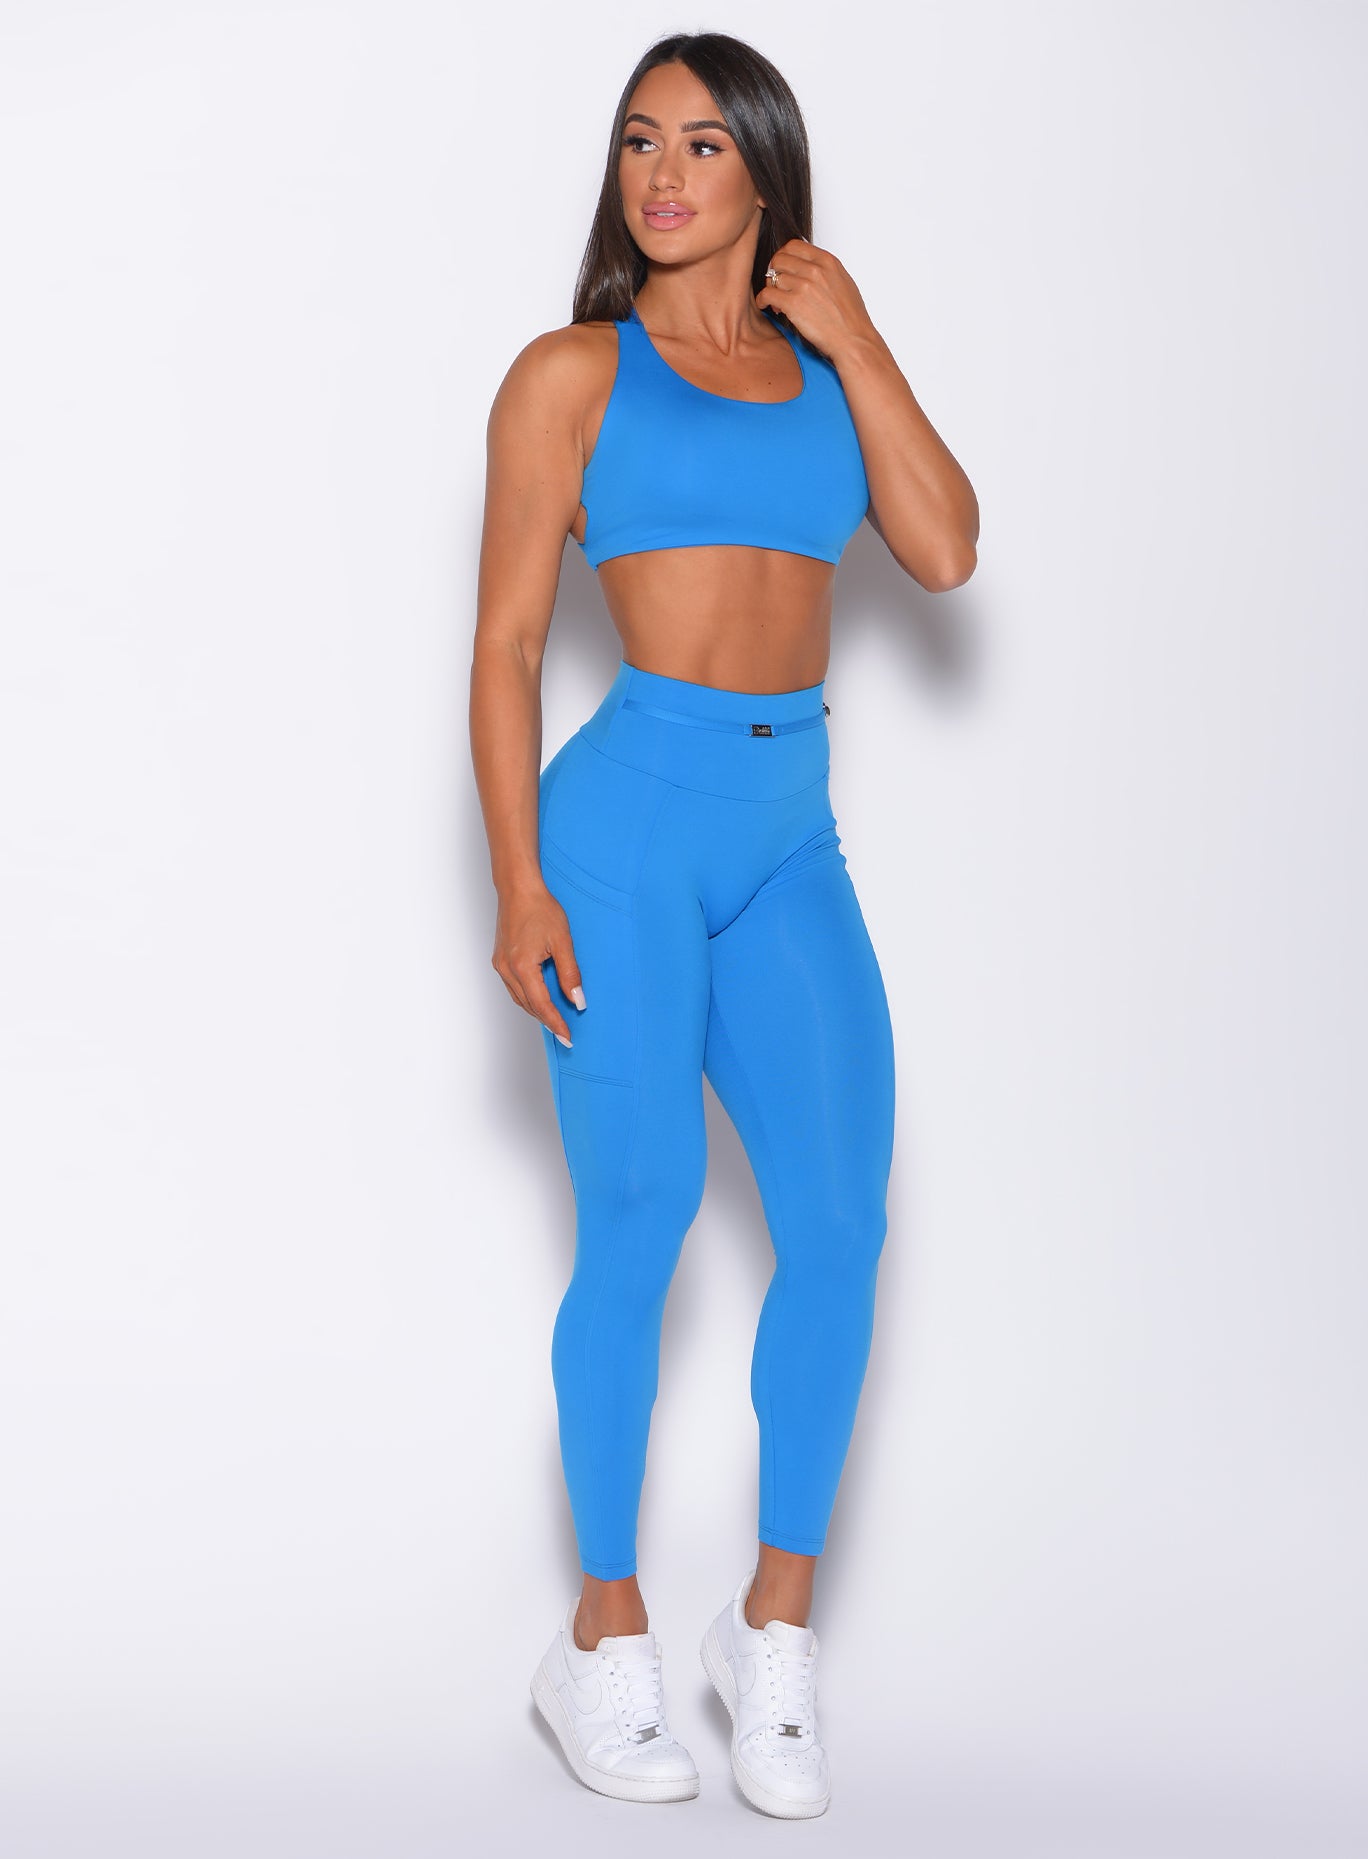 Front profile view of a model wearing our barbell leggings in crystal pop blue color and a matching bra